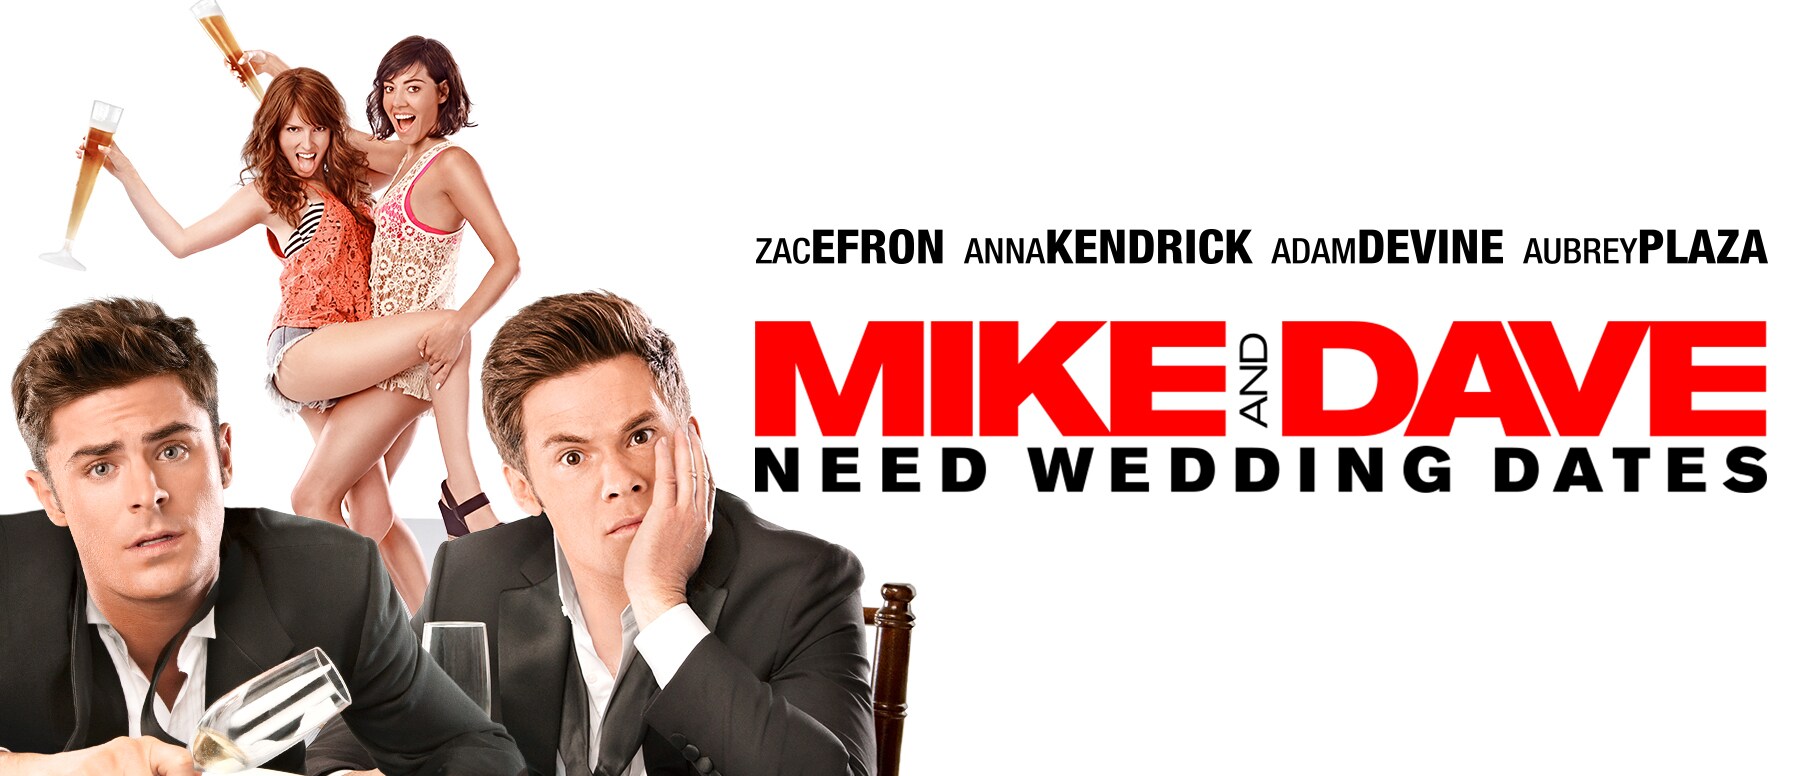 Mike and dave need wedding dates online